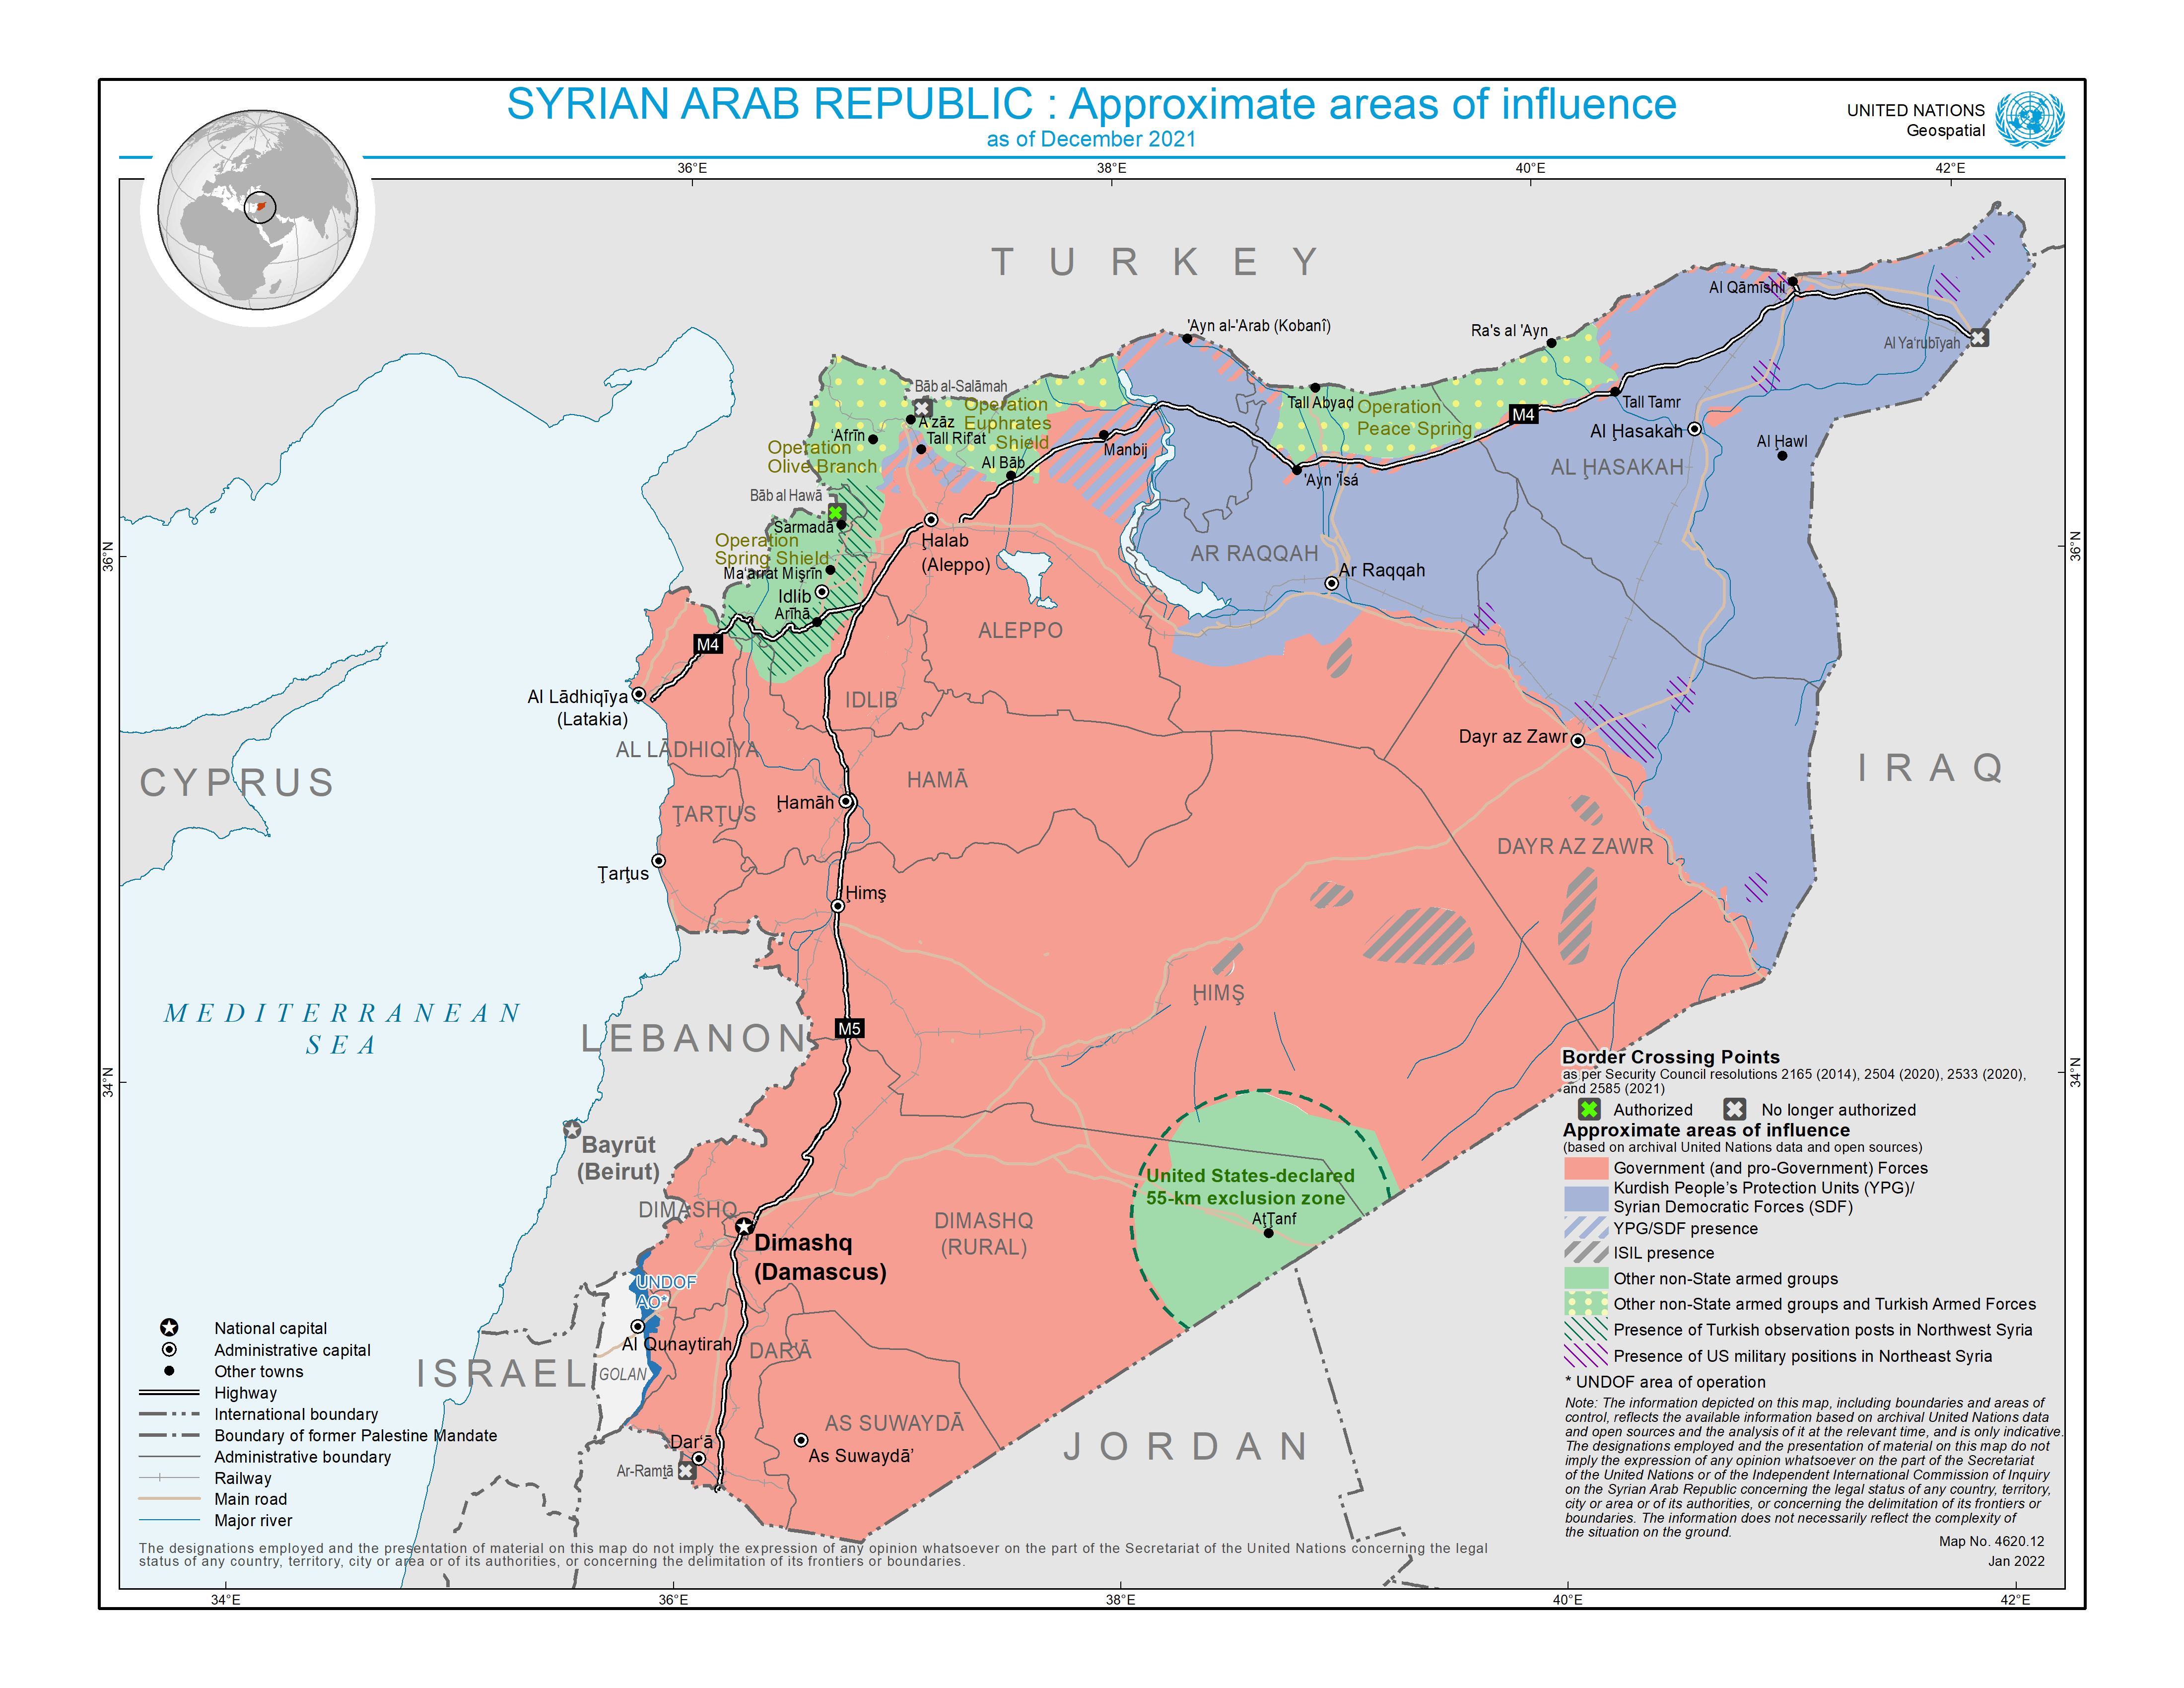 JPG: ​Syrian Arab Republic: timeline of approximate areas of influence